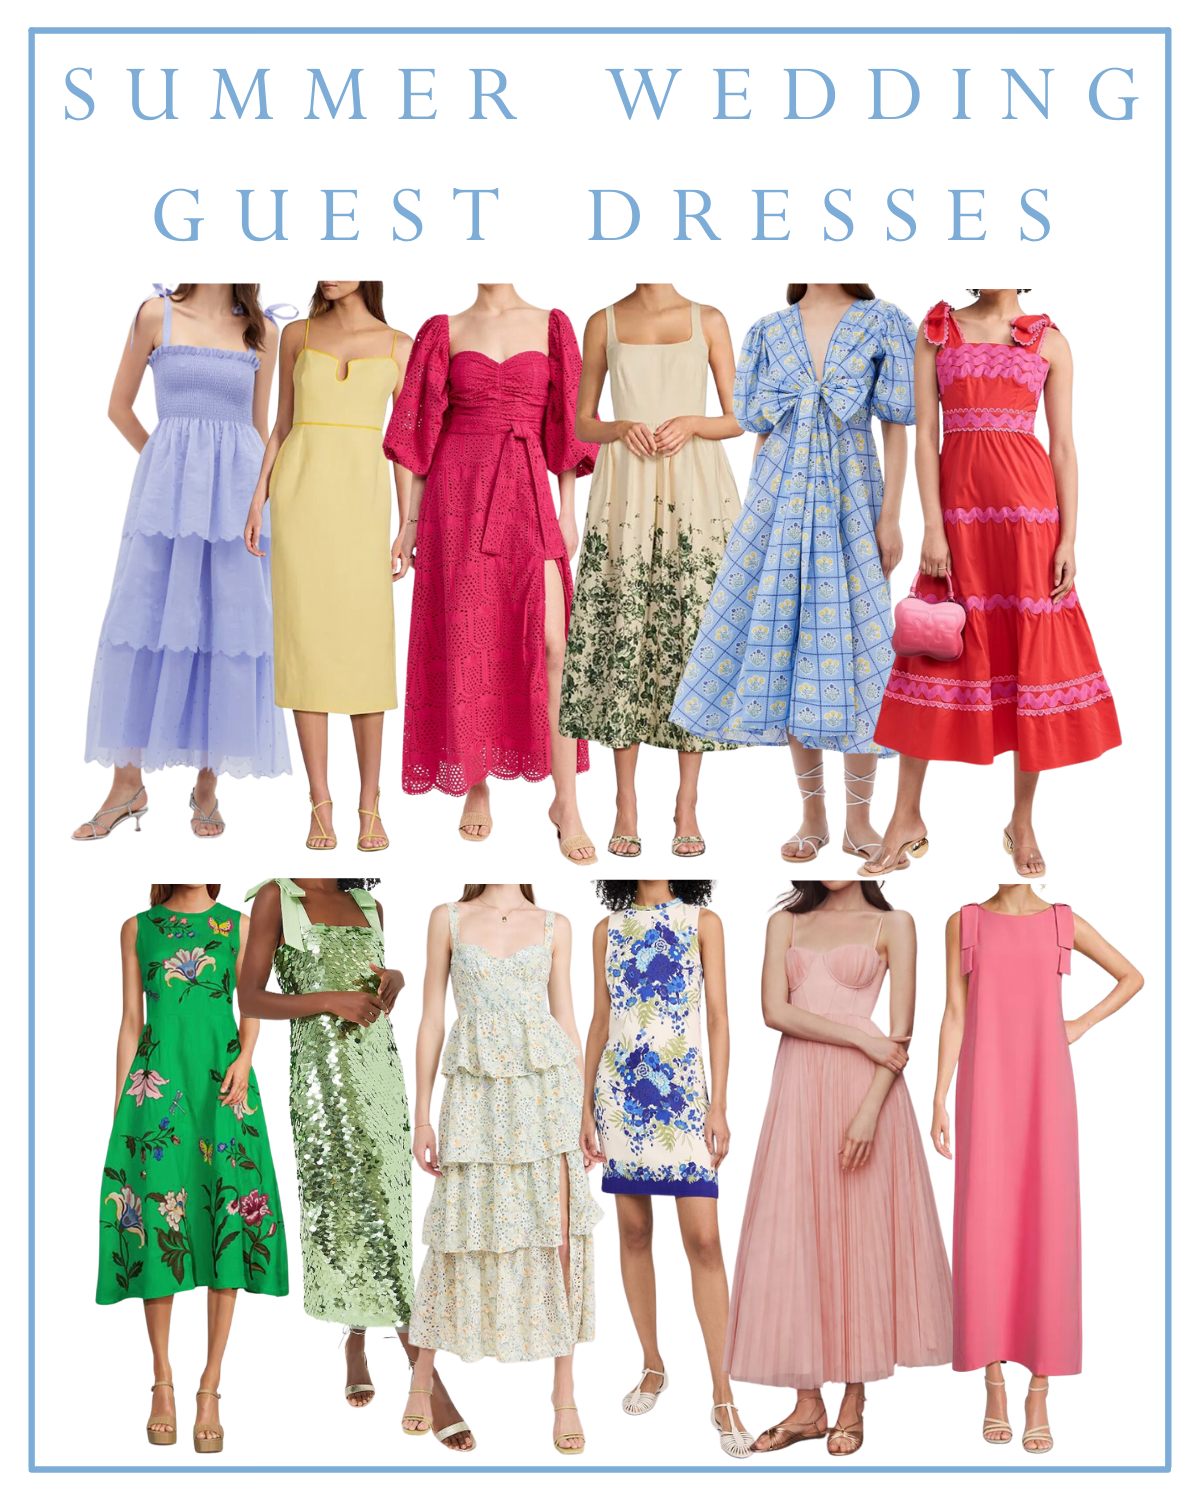 dresses to wear to a summer wedding